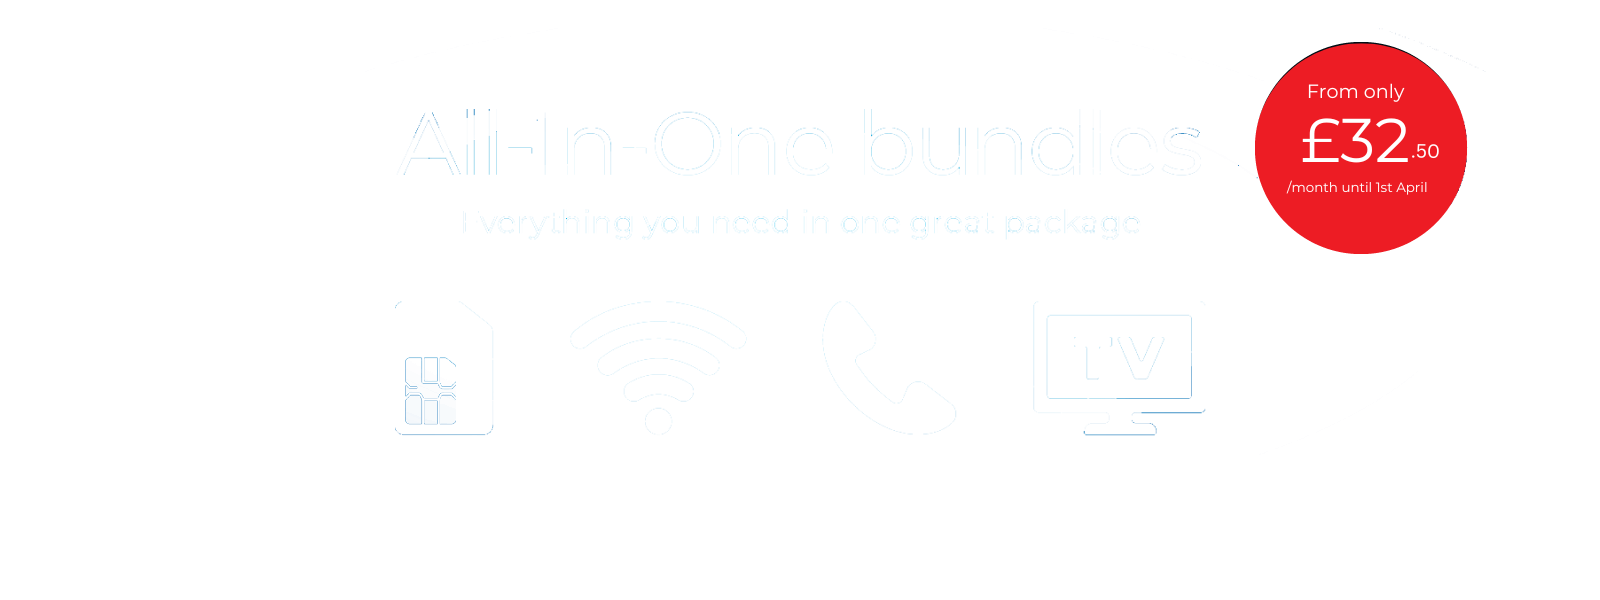 All in one bundles Black Friday Deal